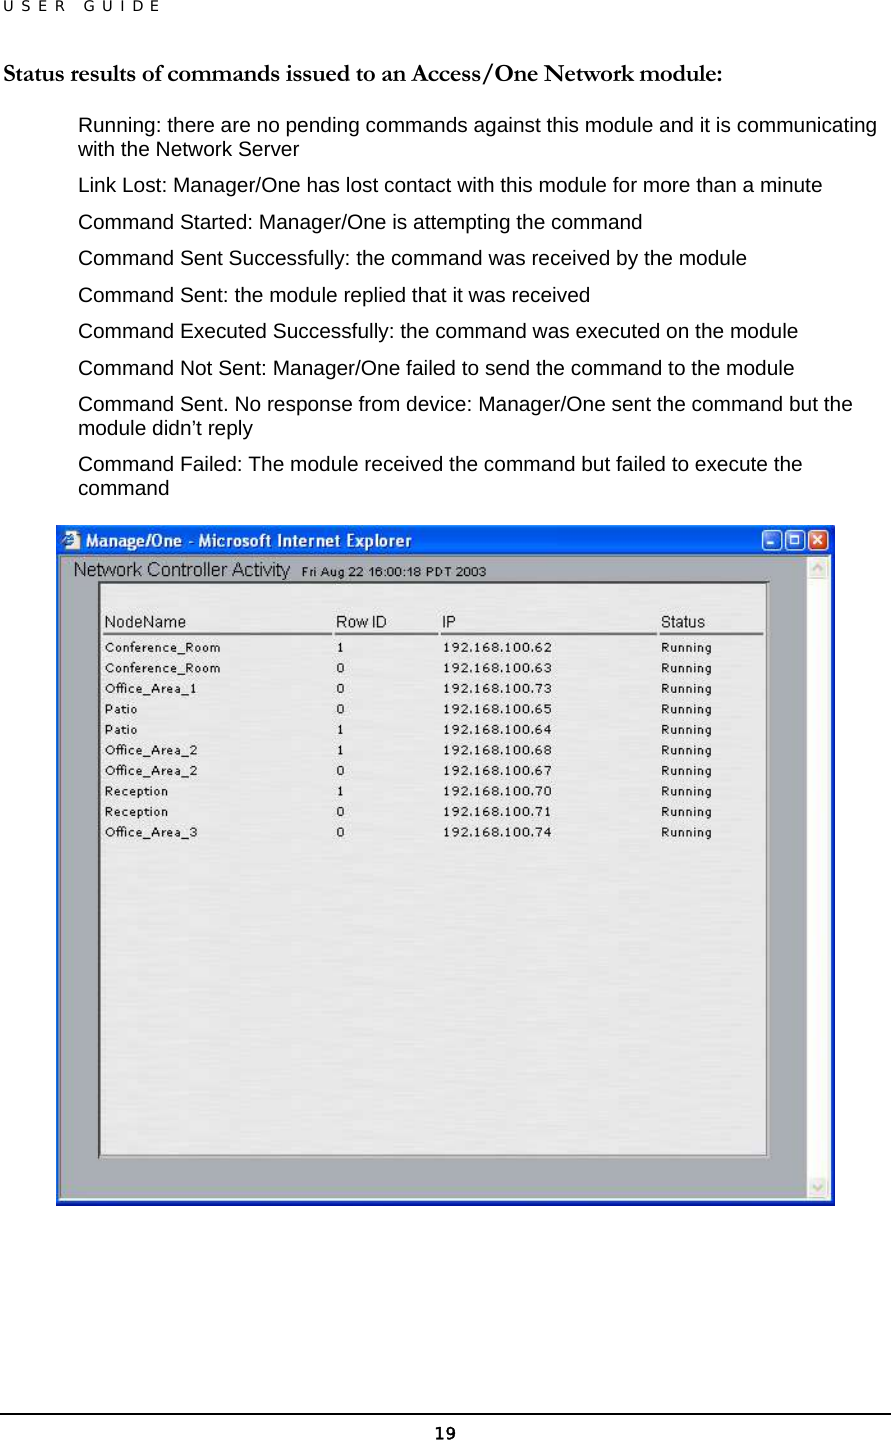 USER GUIDE Status results of commands issued to an Access/One Network module: Running: there are no pending commands against this module and it is communicating with the Network Server Link Lost: Manager/One has lost contact with this module for more than a minute Command Started: Manager/One is attempting the command Command Sent Successfully: the command was received by the module  Command Sent: the module replied that it was received Command Executed Successfully: the command was executed on the module Command Not Sent: Manager/One failed to send the command to the module Command Sent. No response from device: Manager/One sent the command but the module didn’t reply Command Failed: The module received the command but failed to execute the command     19 